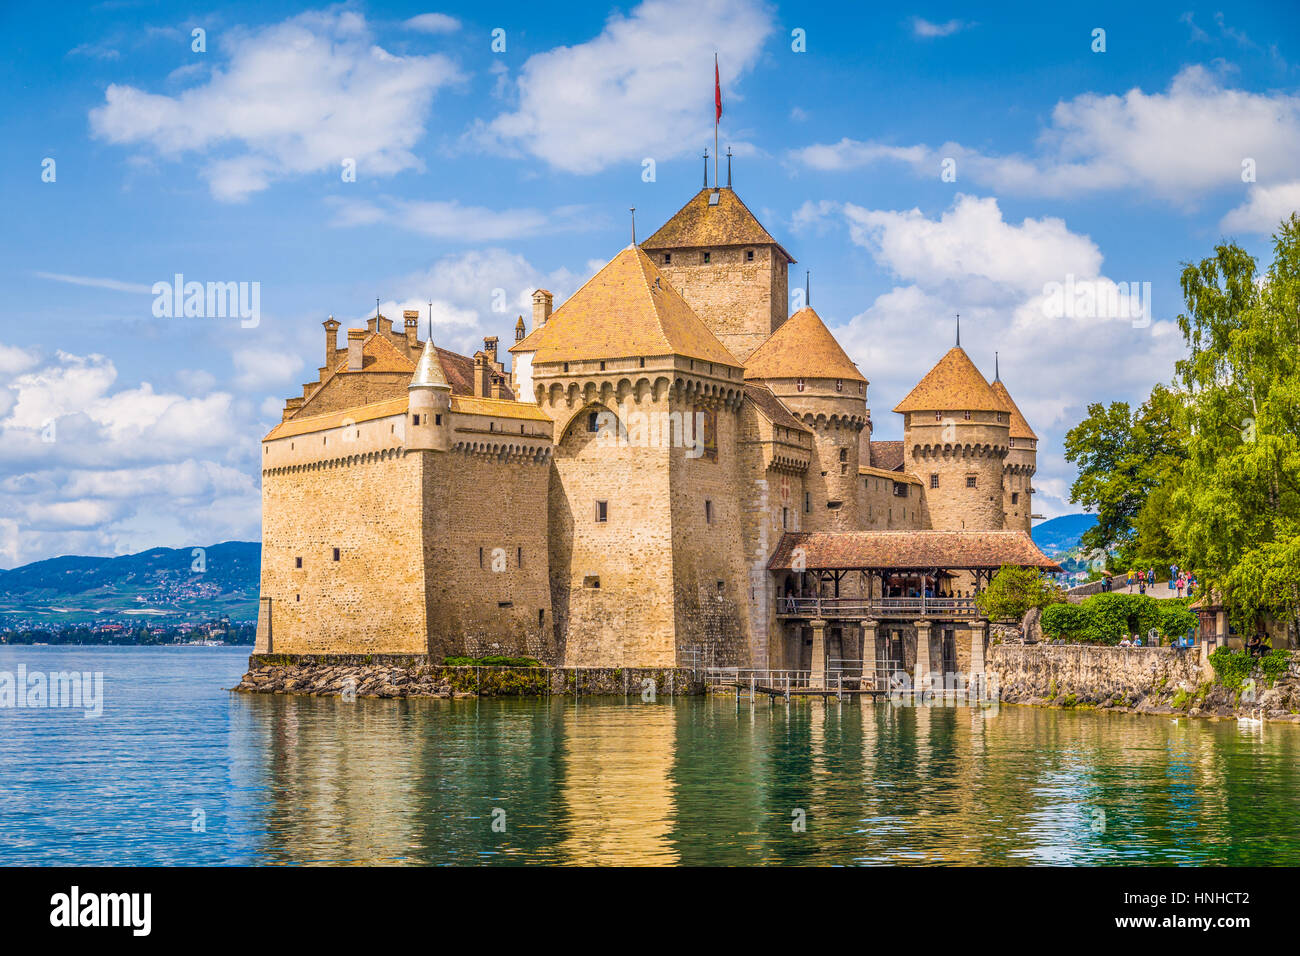 Classic view of famous Chateau de Chillon at beautiful Lake Geneva, one of Switzerland's major tourist attractions and most visited castles in Europe Stock Photo